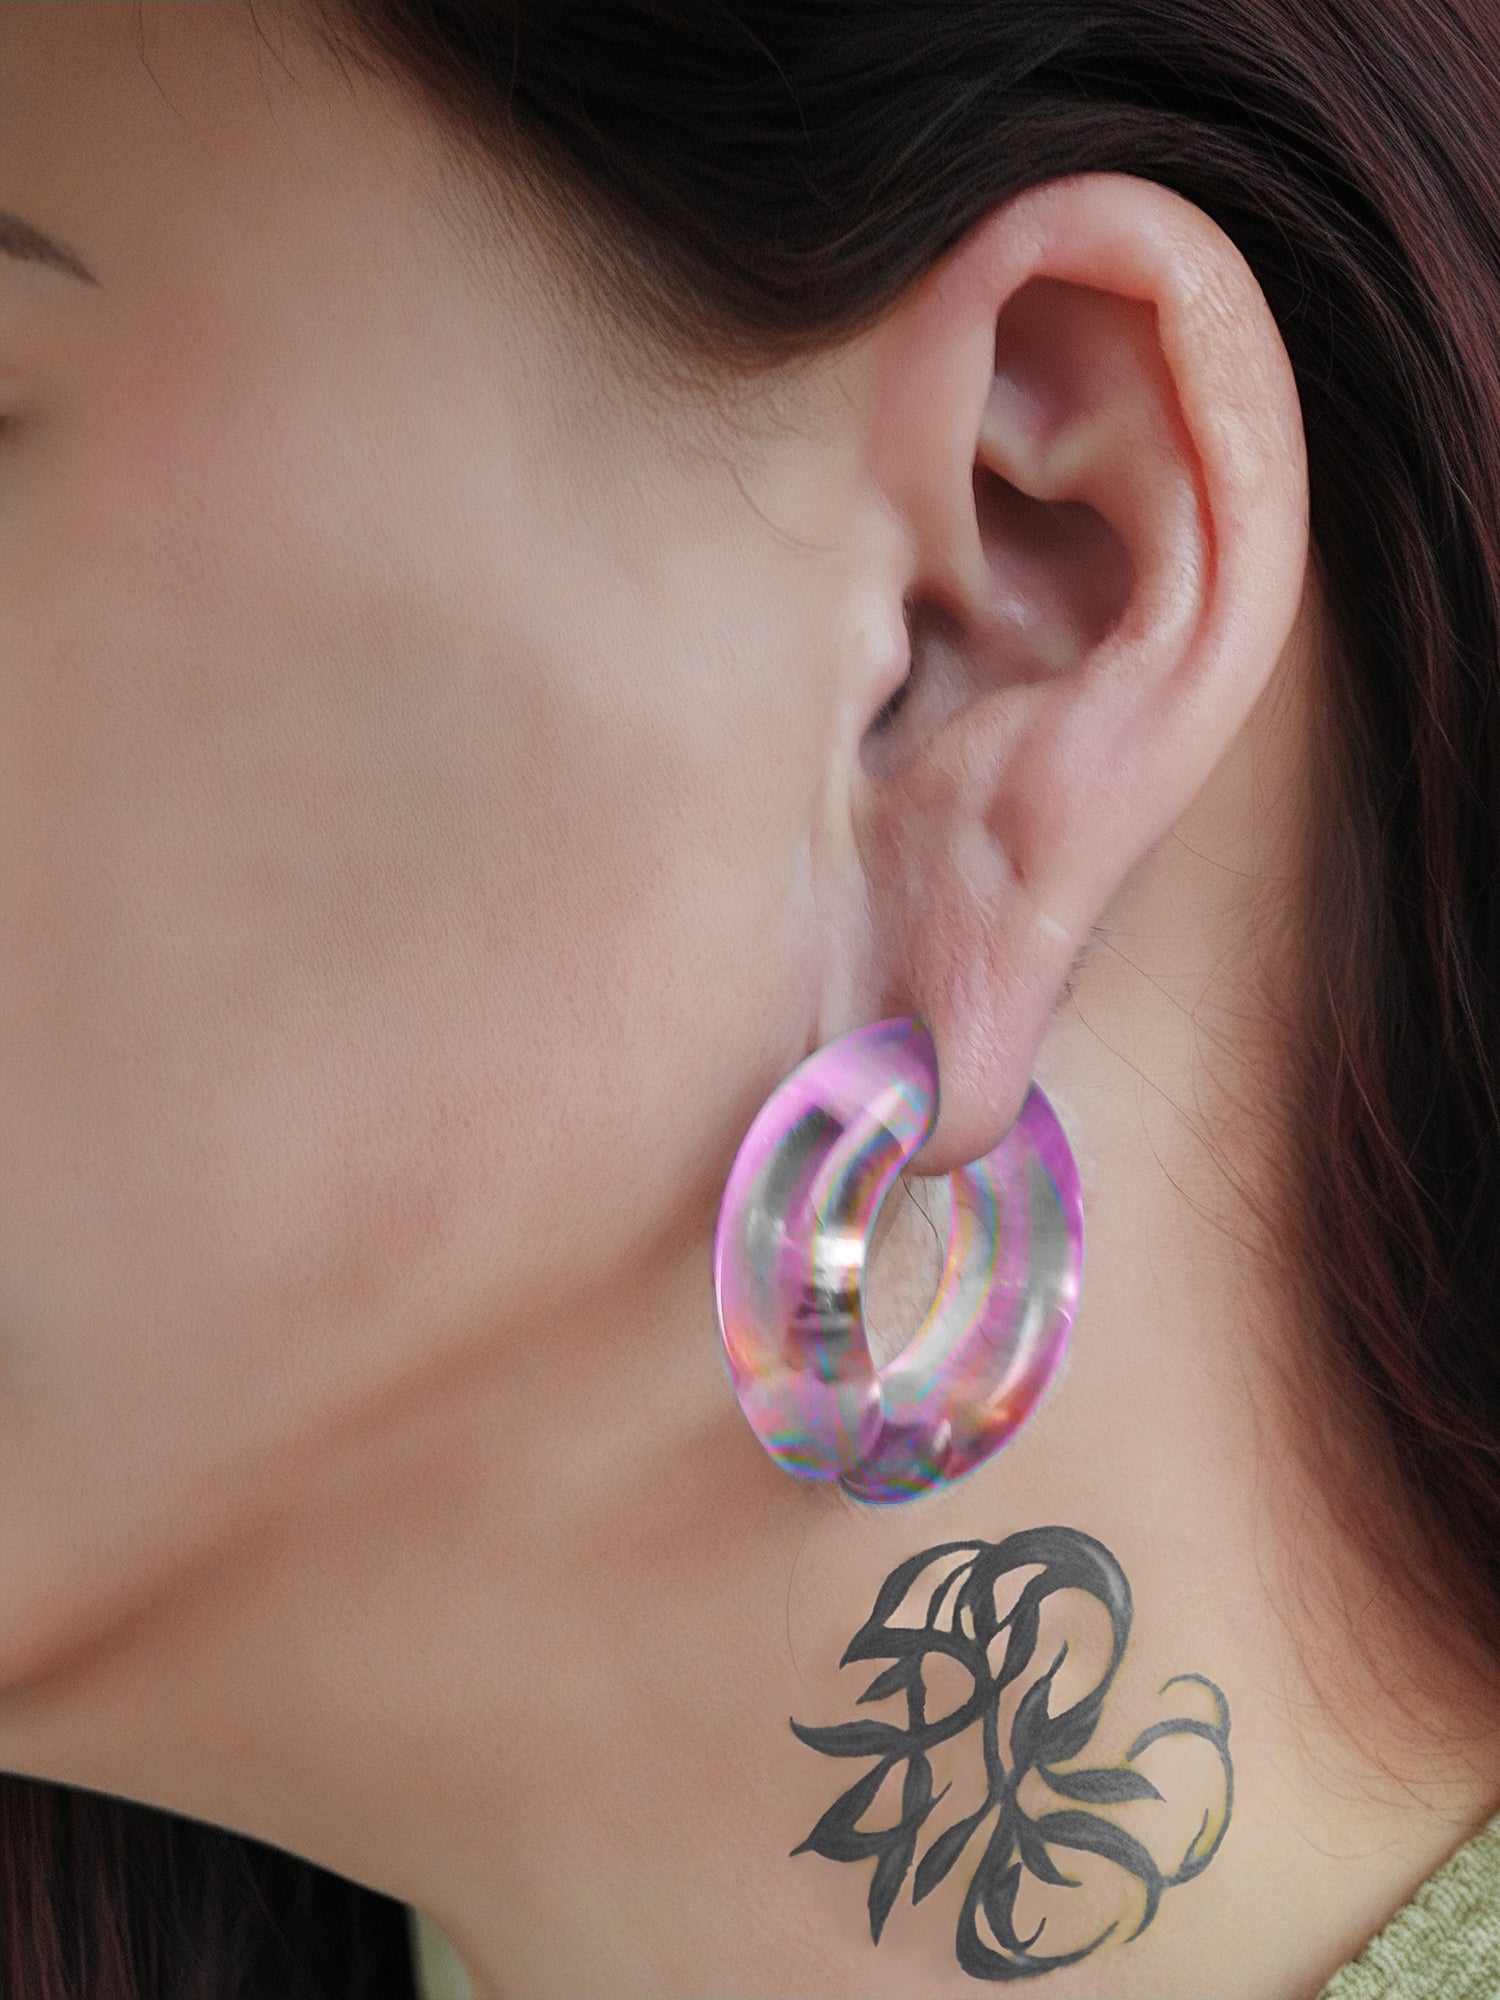 1 Pair C Shaped Ear Plugs Tunnel Pink Glass Stretching Earring Ear Gauge Expanders